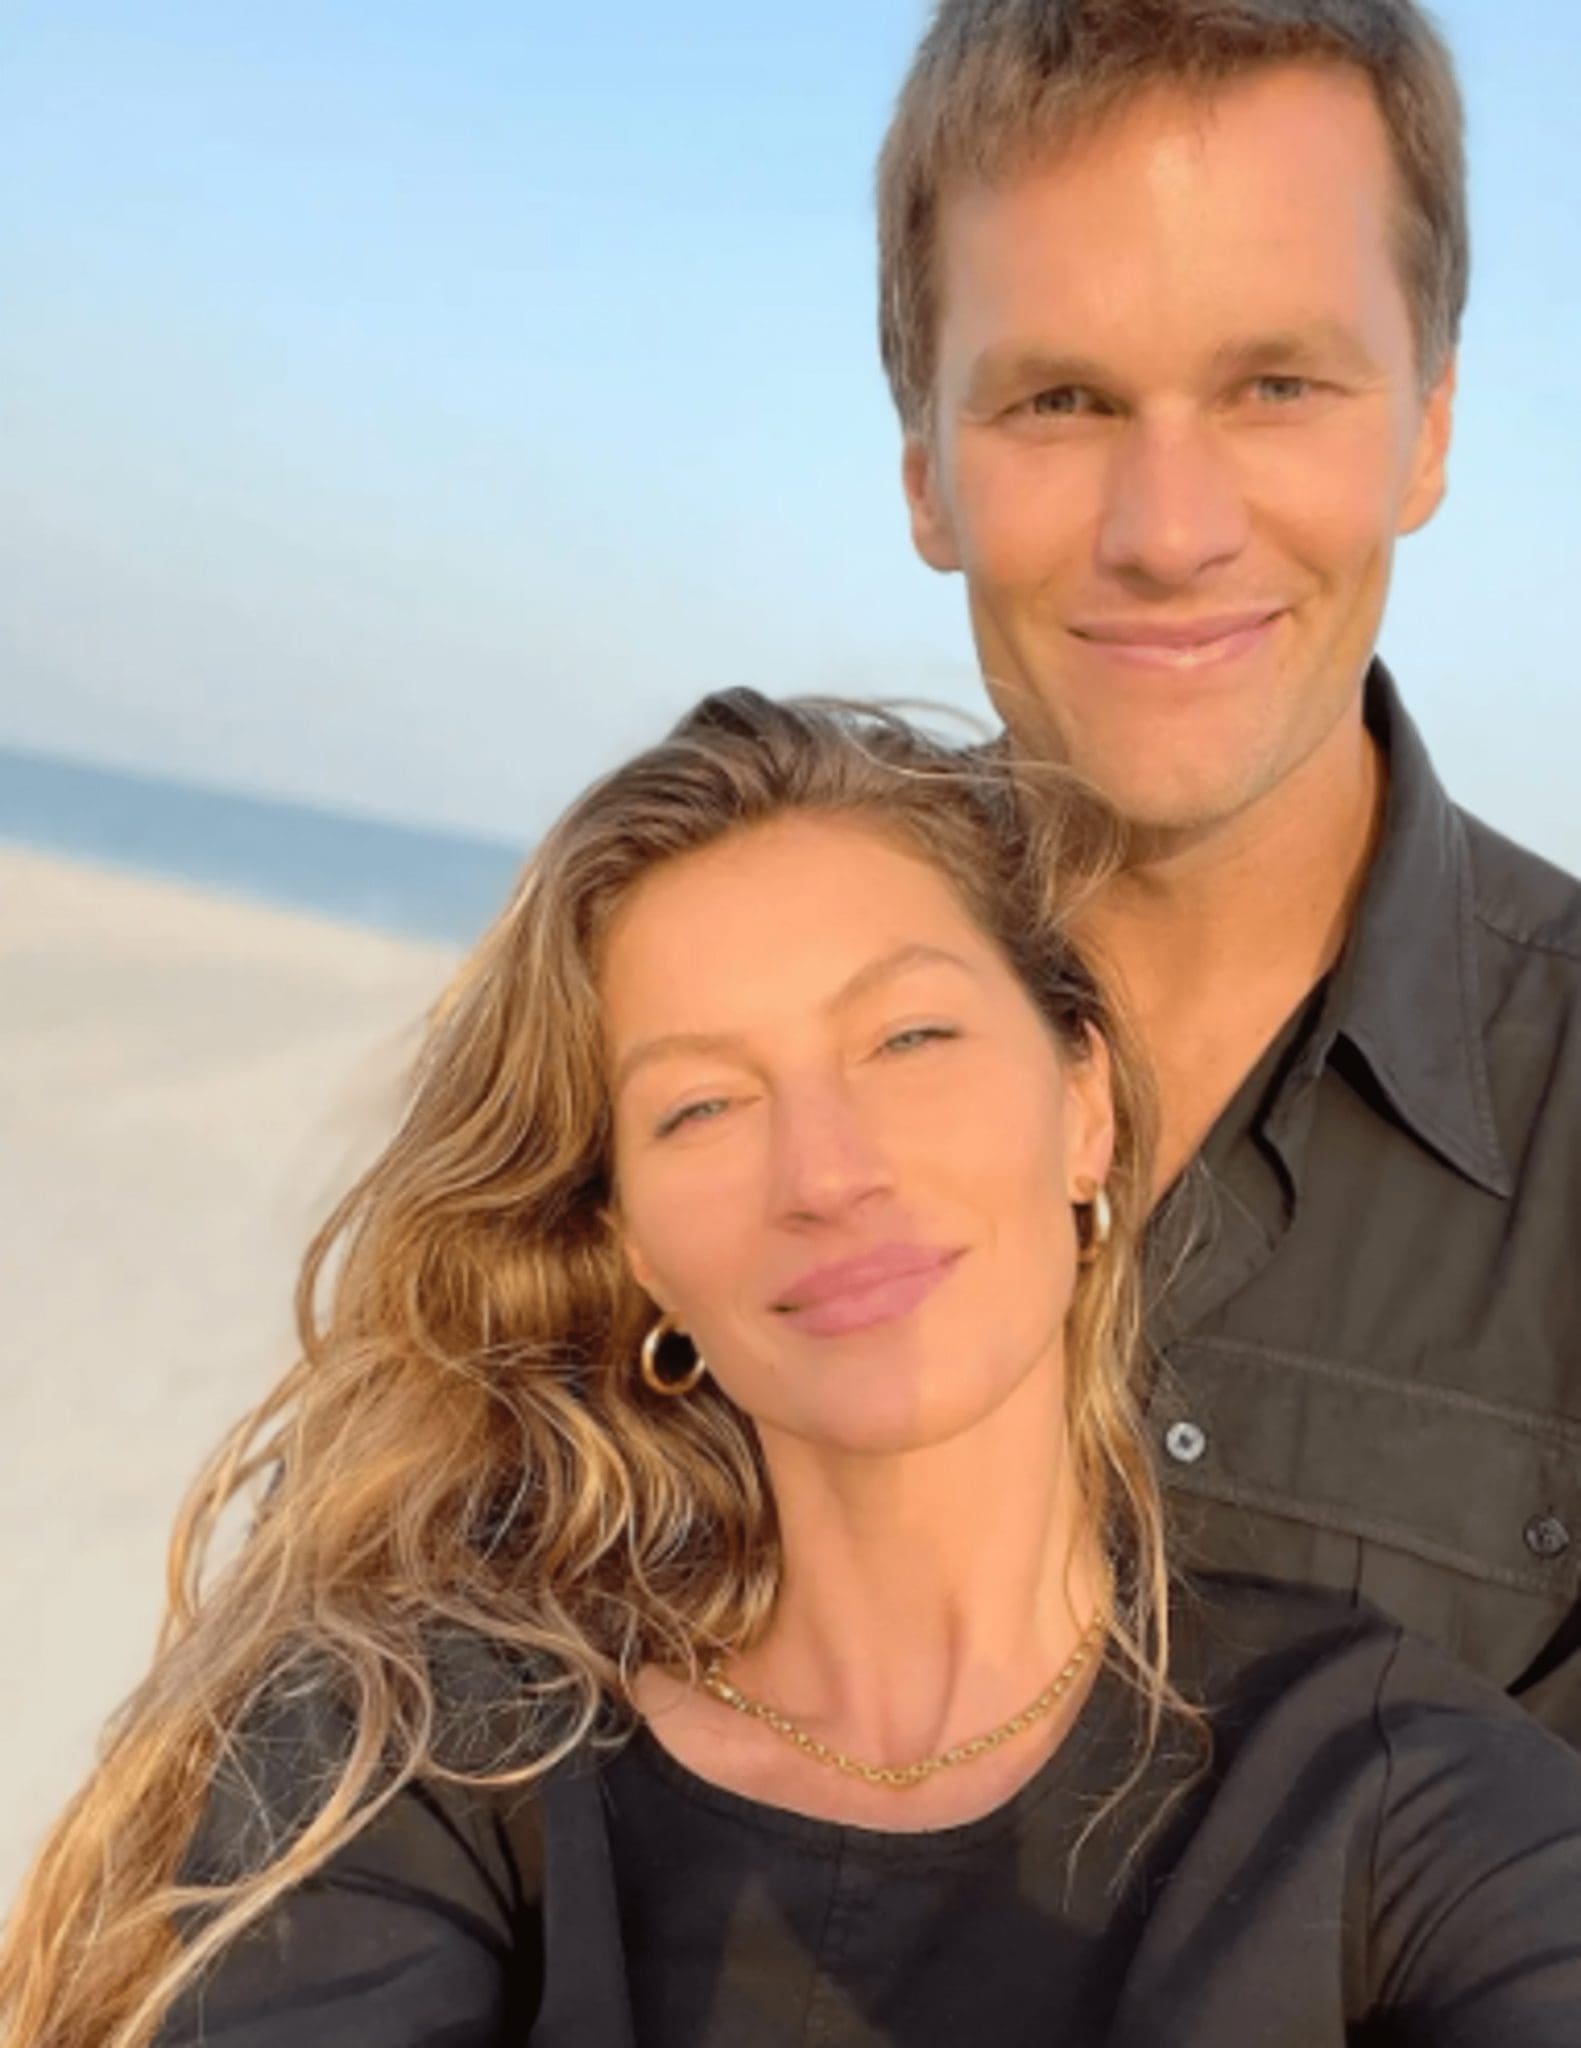 A lot of people are upset and angry about Tom Brady and Gisele Bündchen getting a divorce.